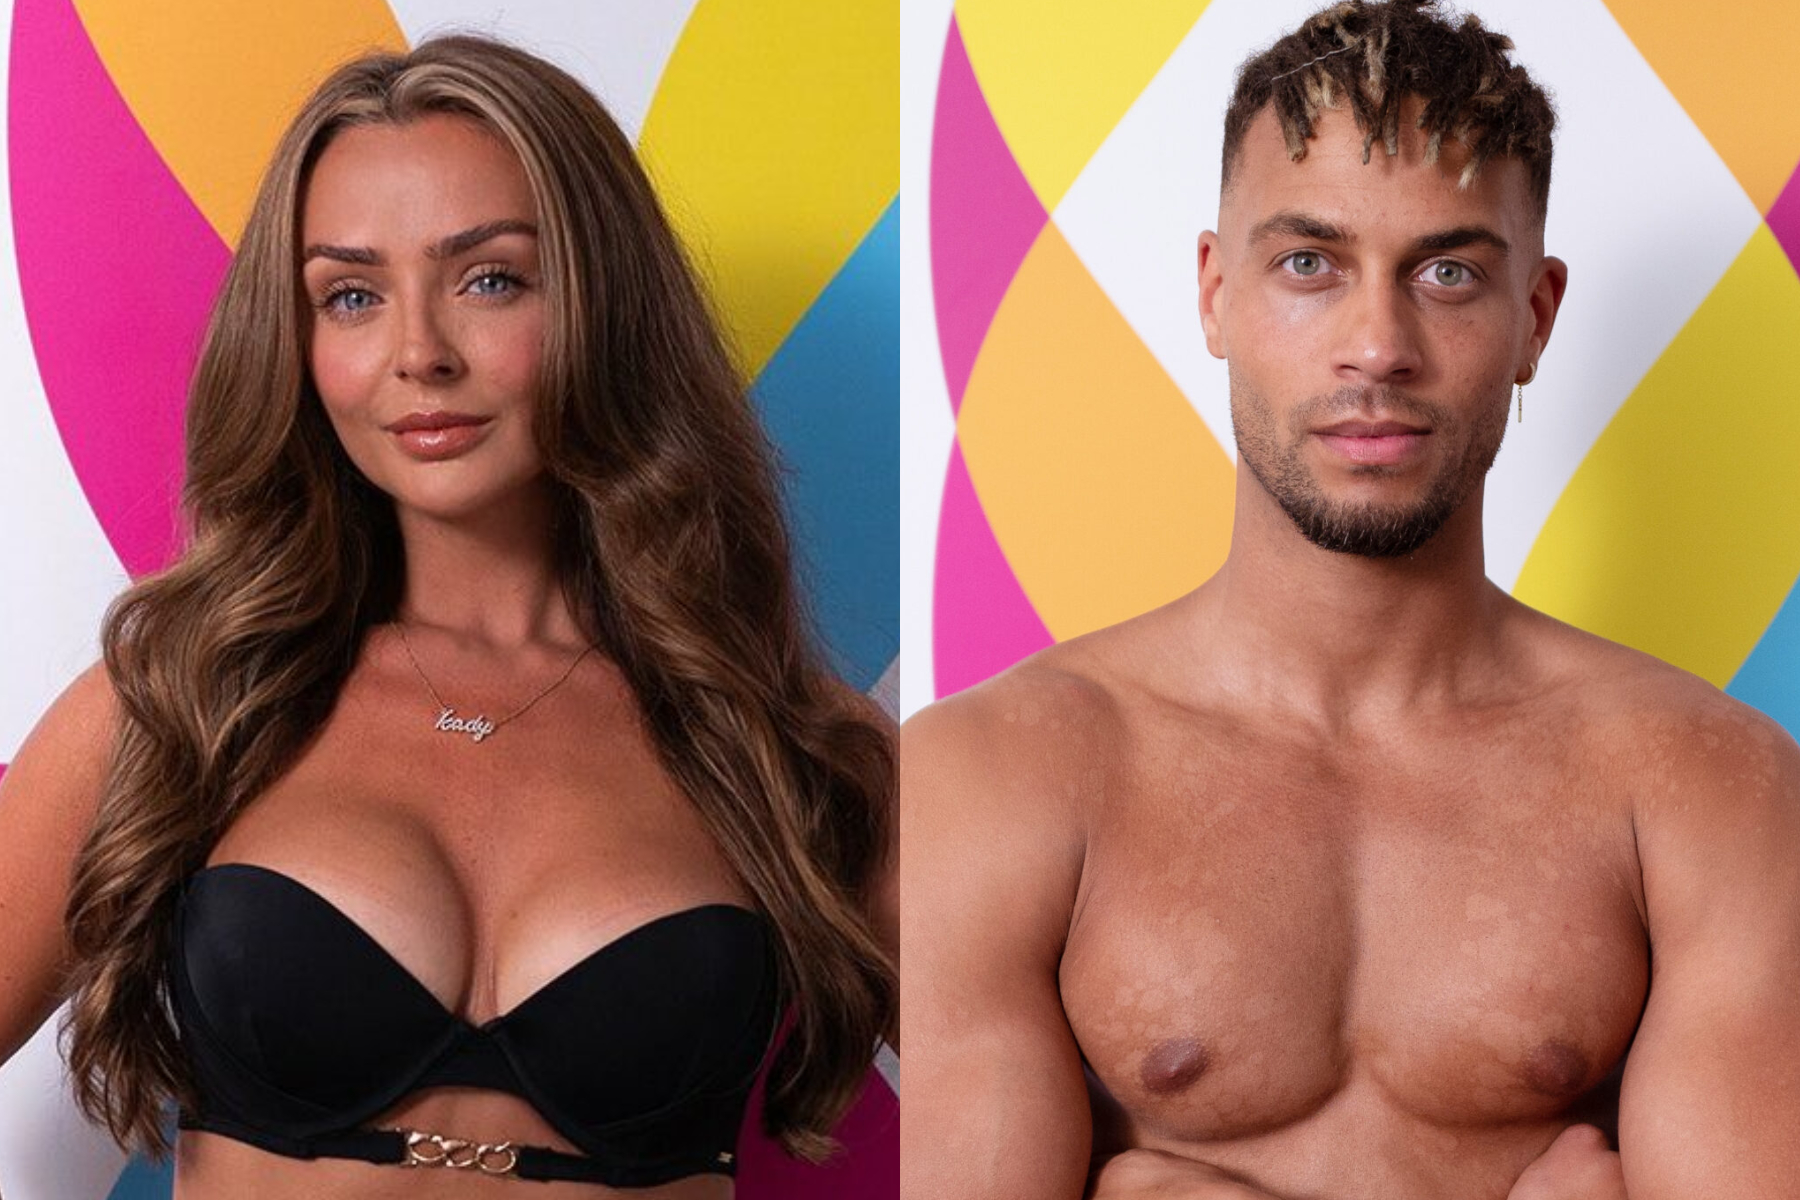 Kady and Ouzy’s Cheating Scandal: Love Island’s Unexpected Twist